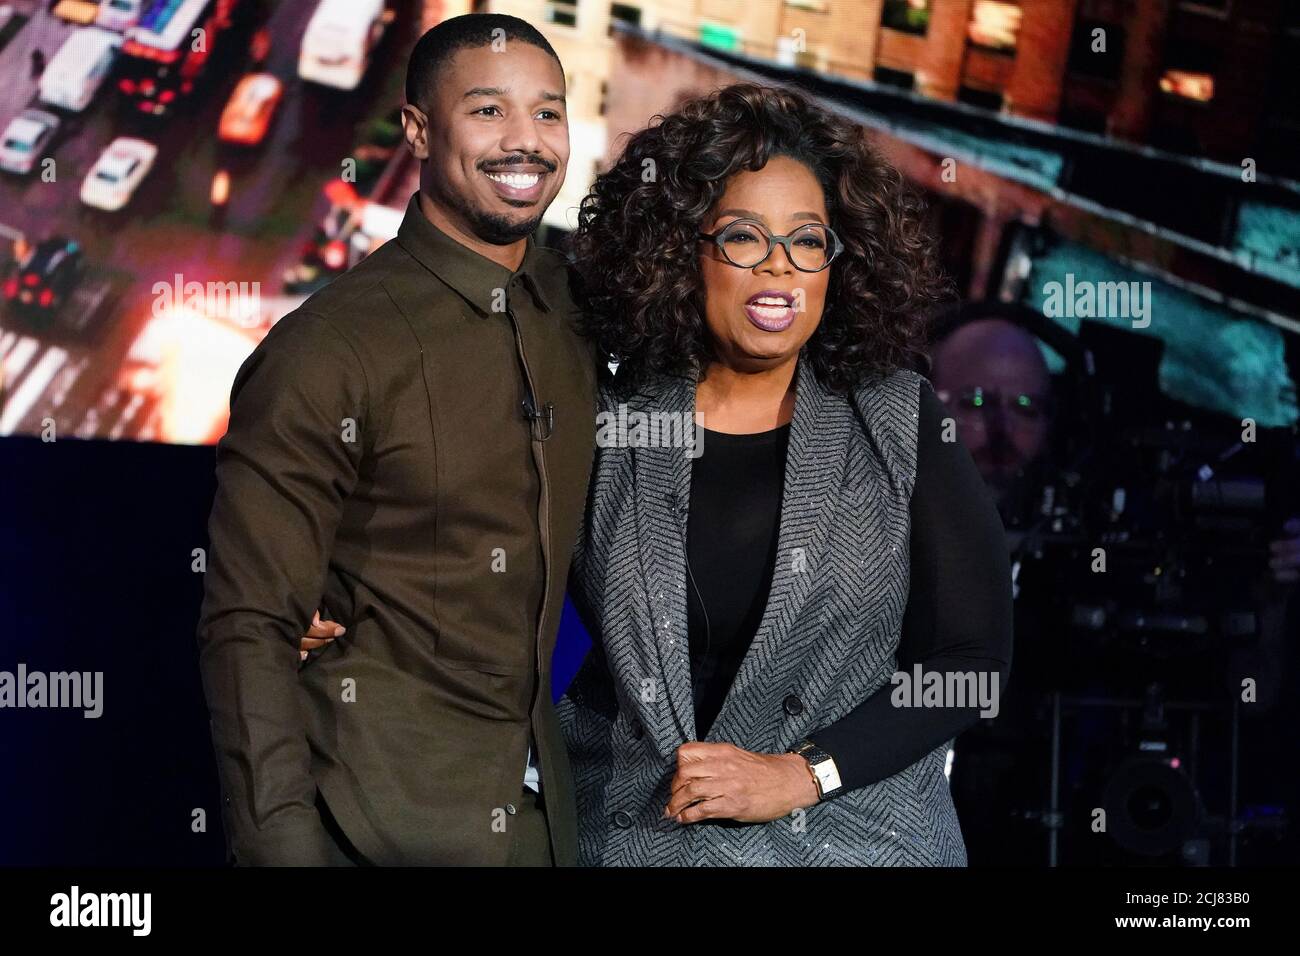 skipper Kompliment behandle Actor Michael B. Jordan hugs Oprah Winfrey on stage during a taping of her  TV show in the Manhattan borough of New York City, New York, U.S., February  5, 2019. REUTERS/Carlo Allegri